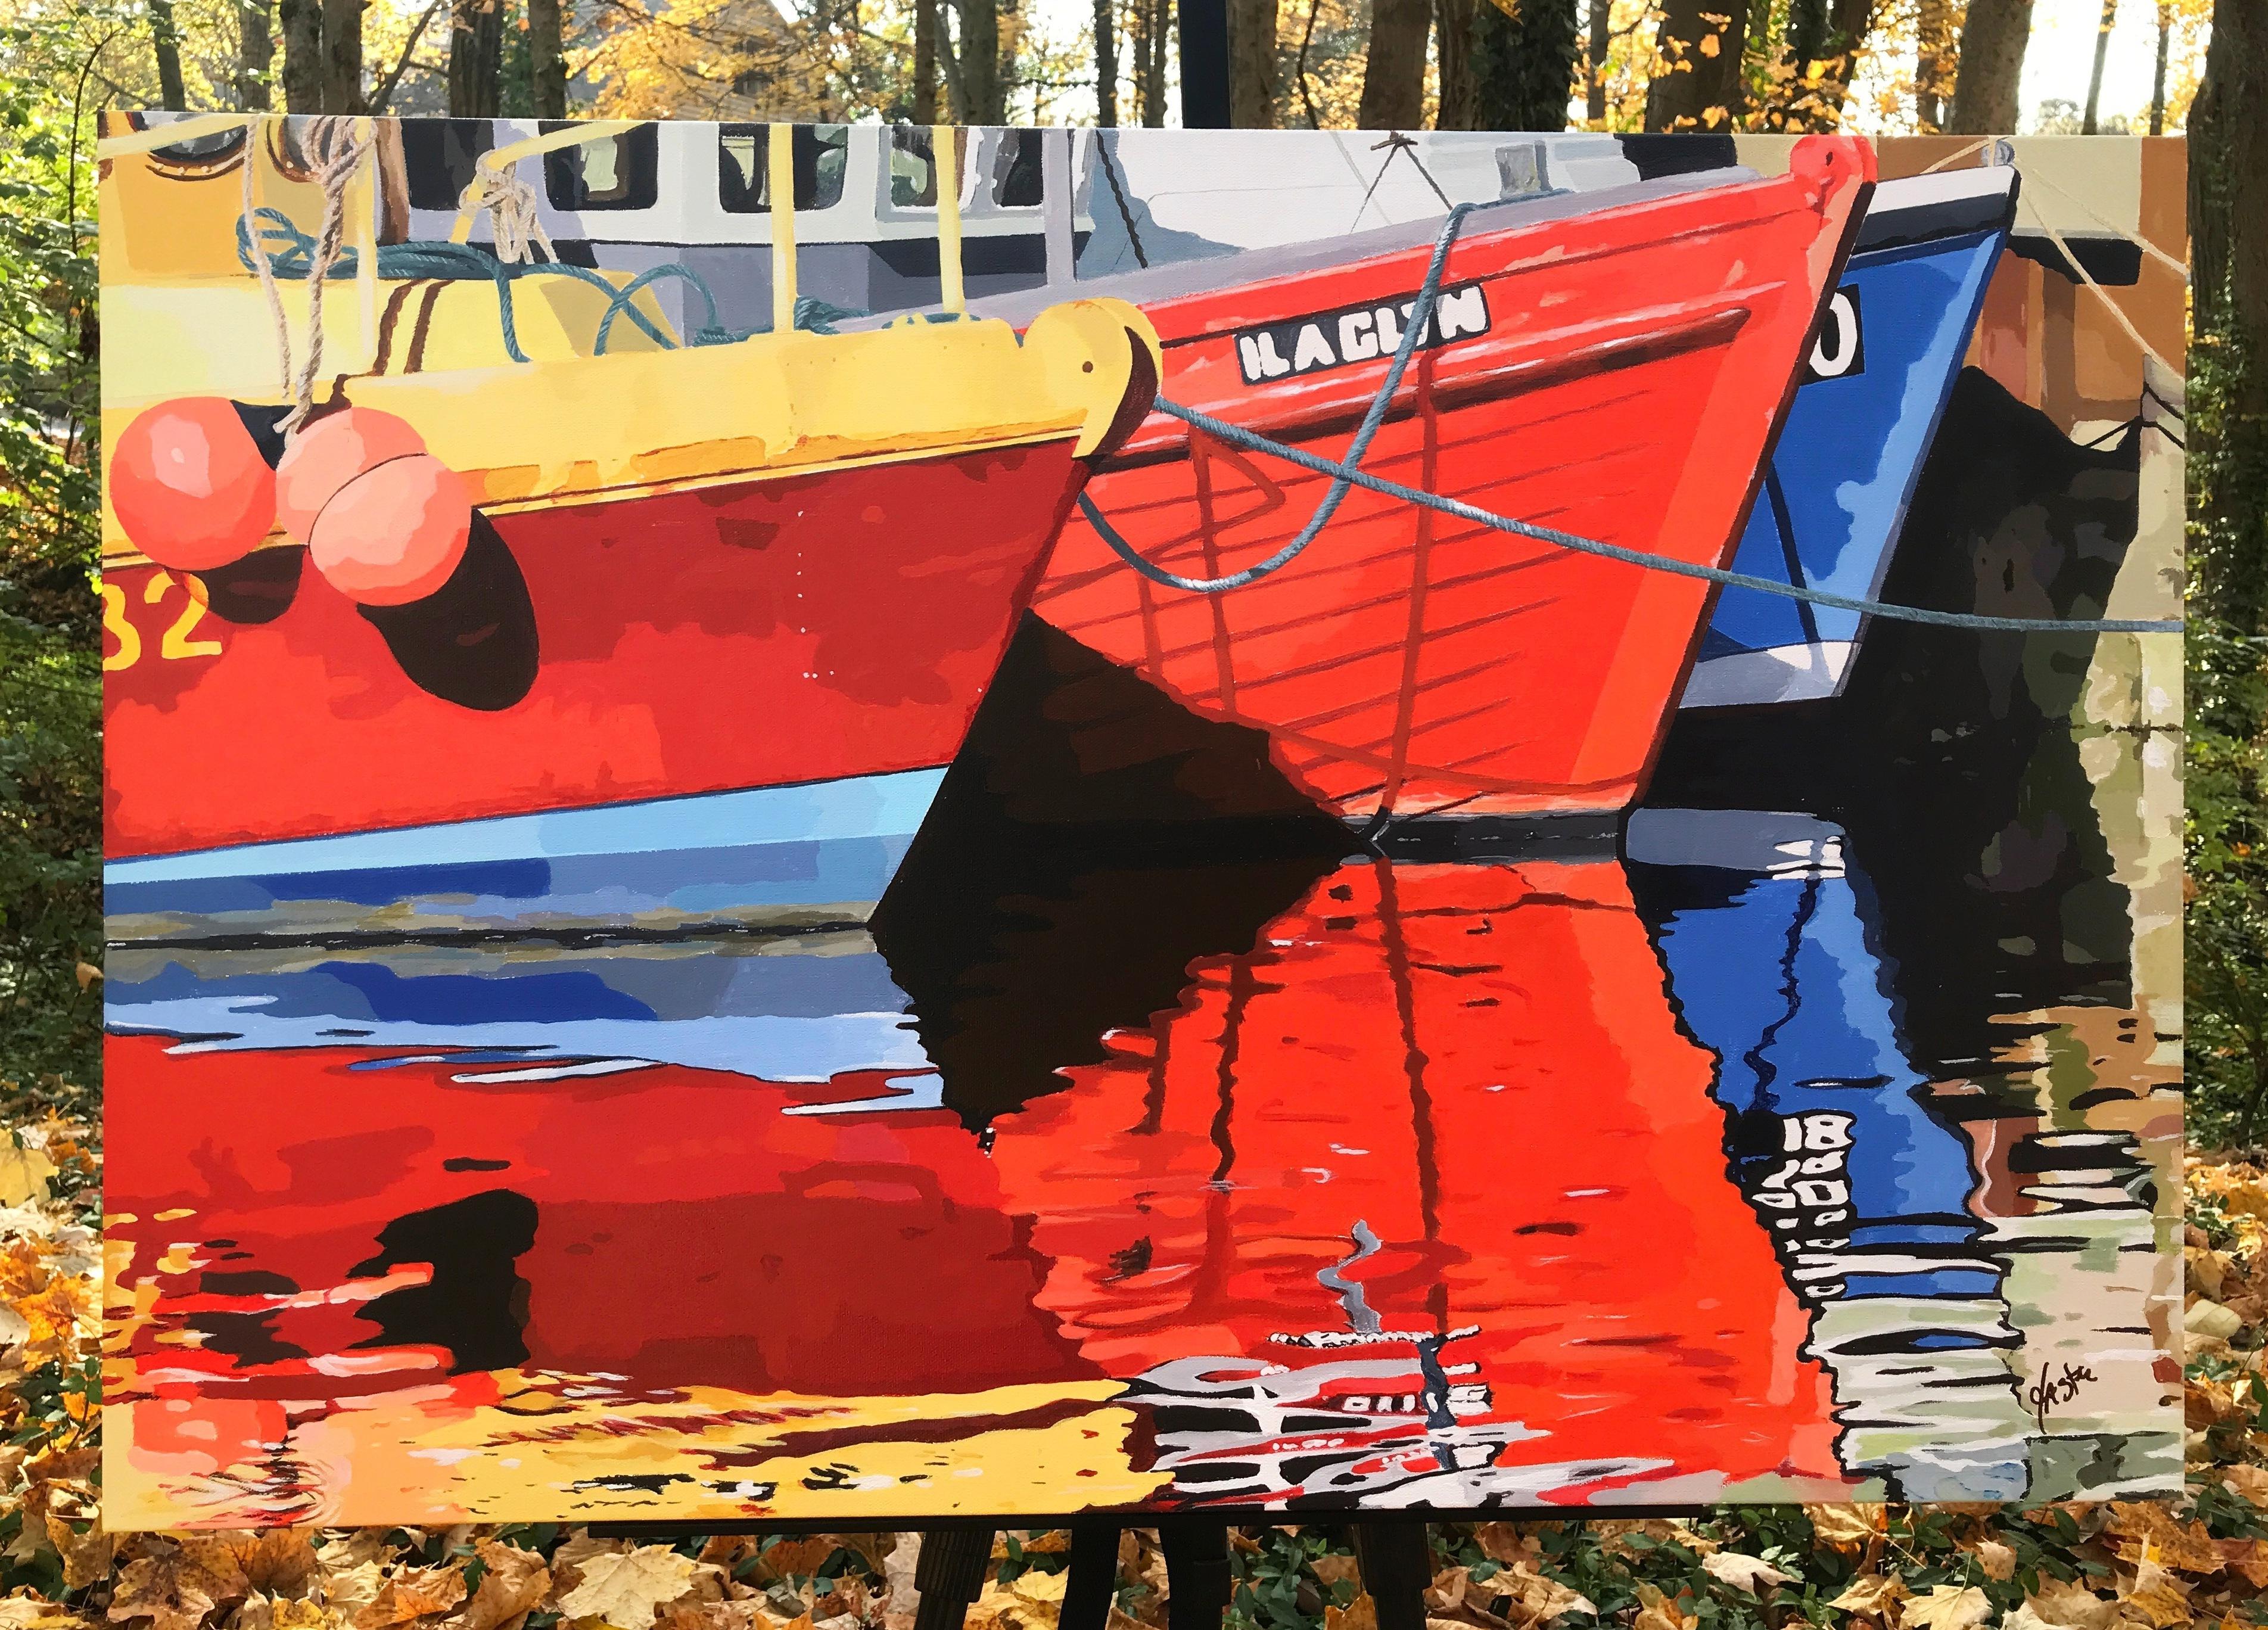 <p>Artist Comments<br>Artist John Jaster depicts three large fishing boats in bright shades of red, orange, and blue. Their striking reflections ripple across the water in a fragmented mirror image. John uses heavy body acrylics with multiple layers